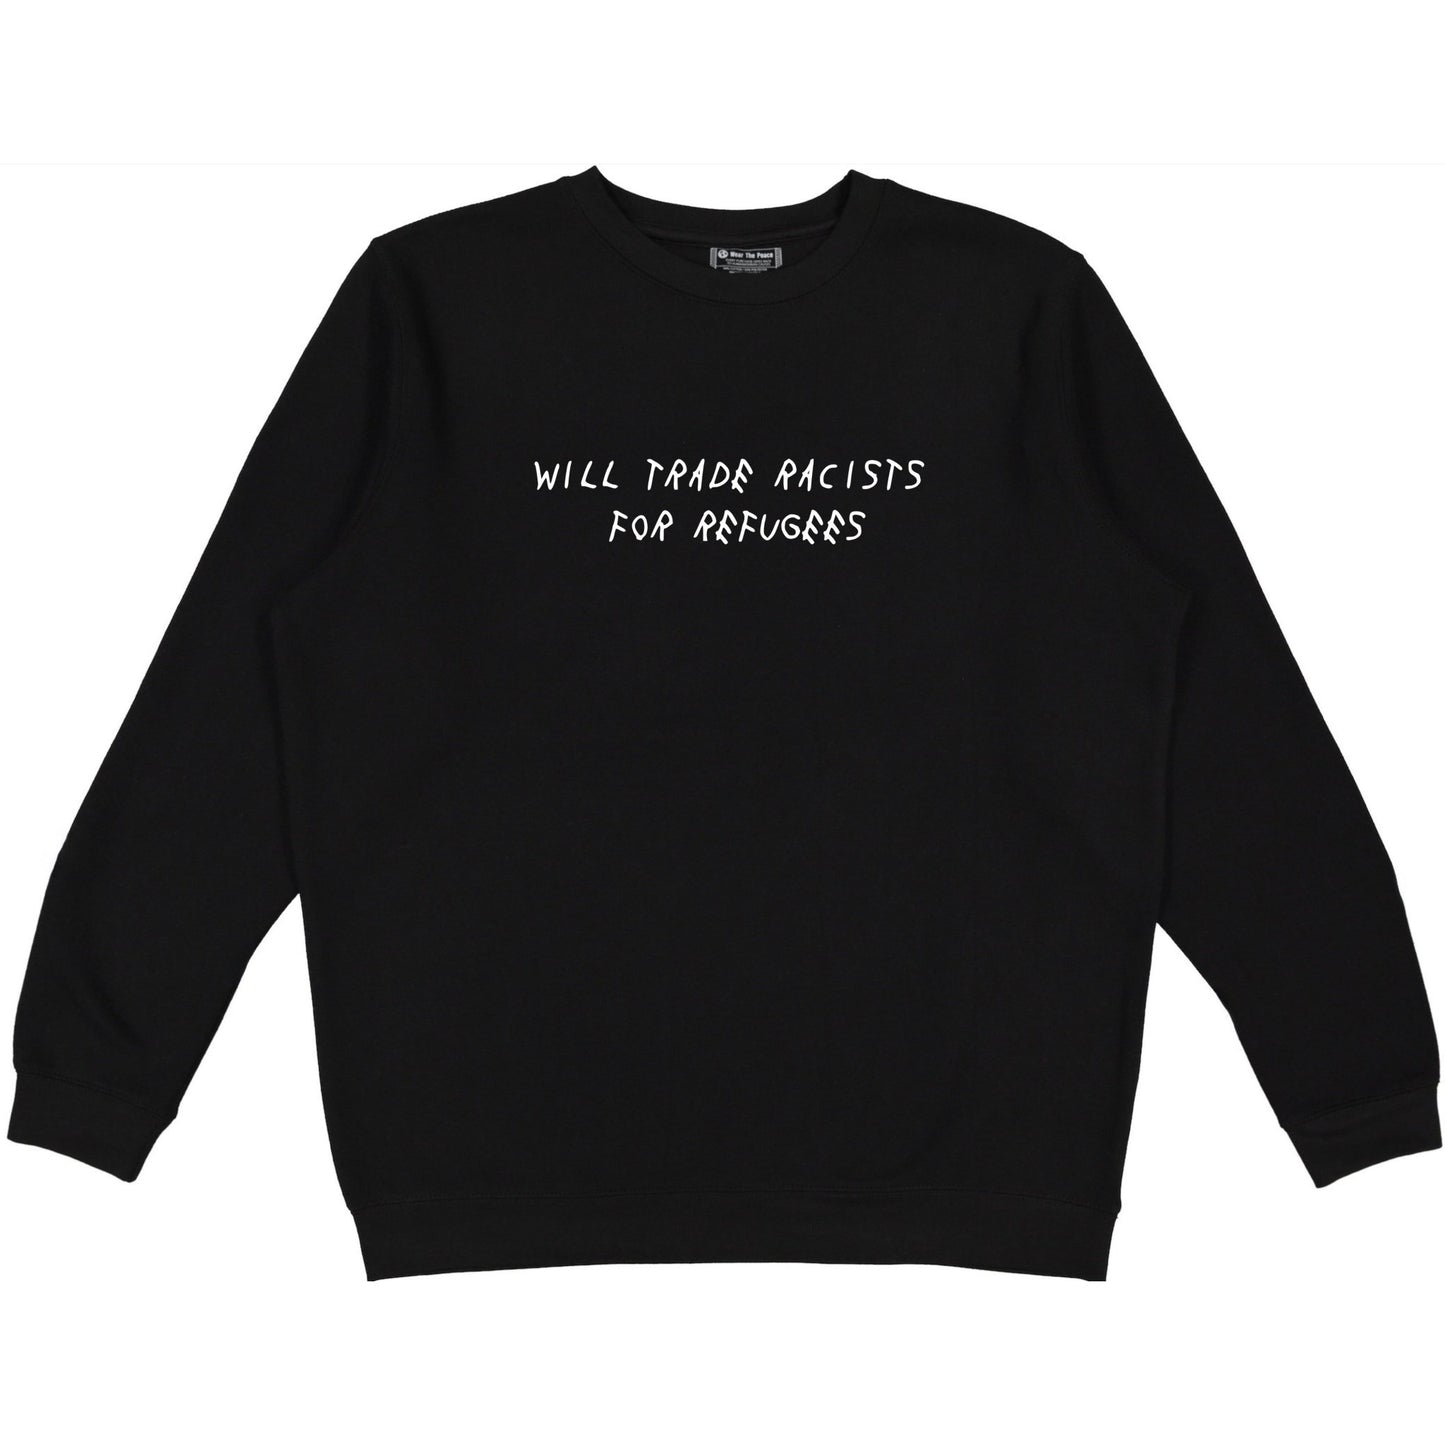 Load image into Gallery viewer, Trade Racists For Refugees Crewneck Wear The Peace Crewnecks S
